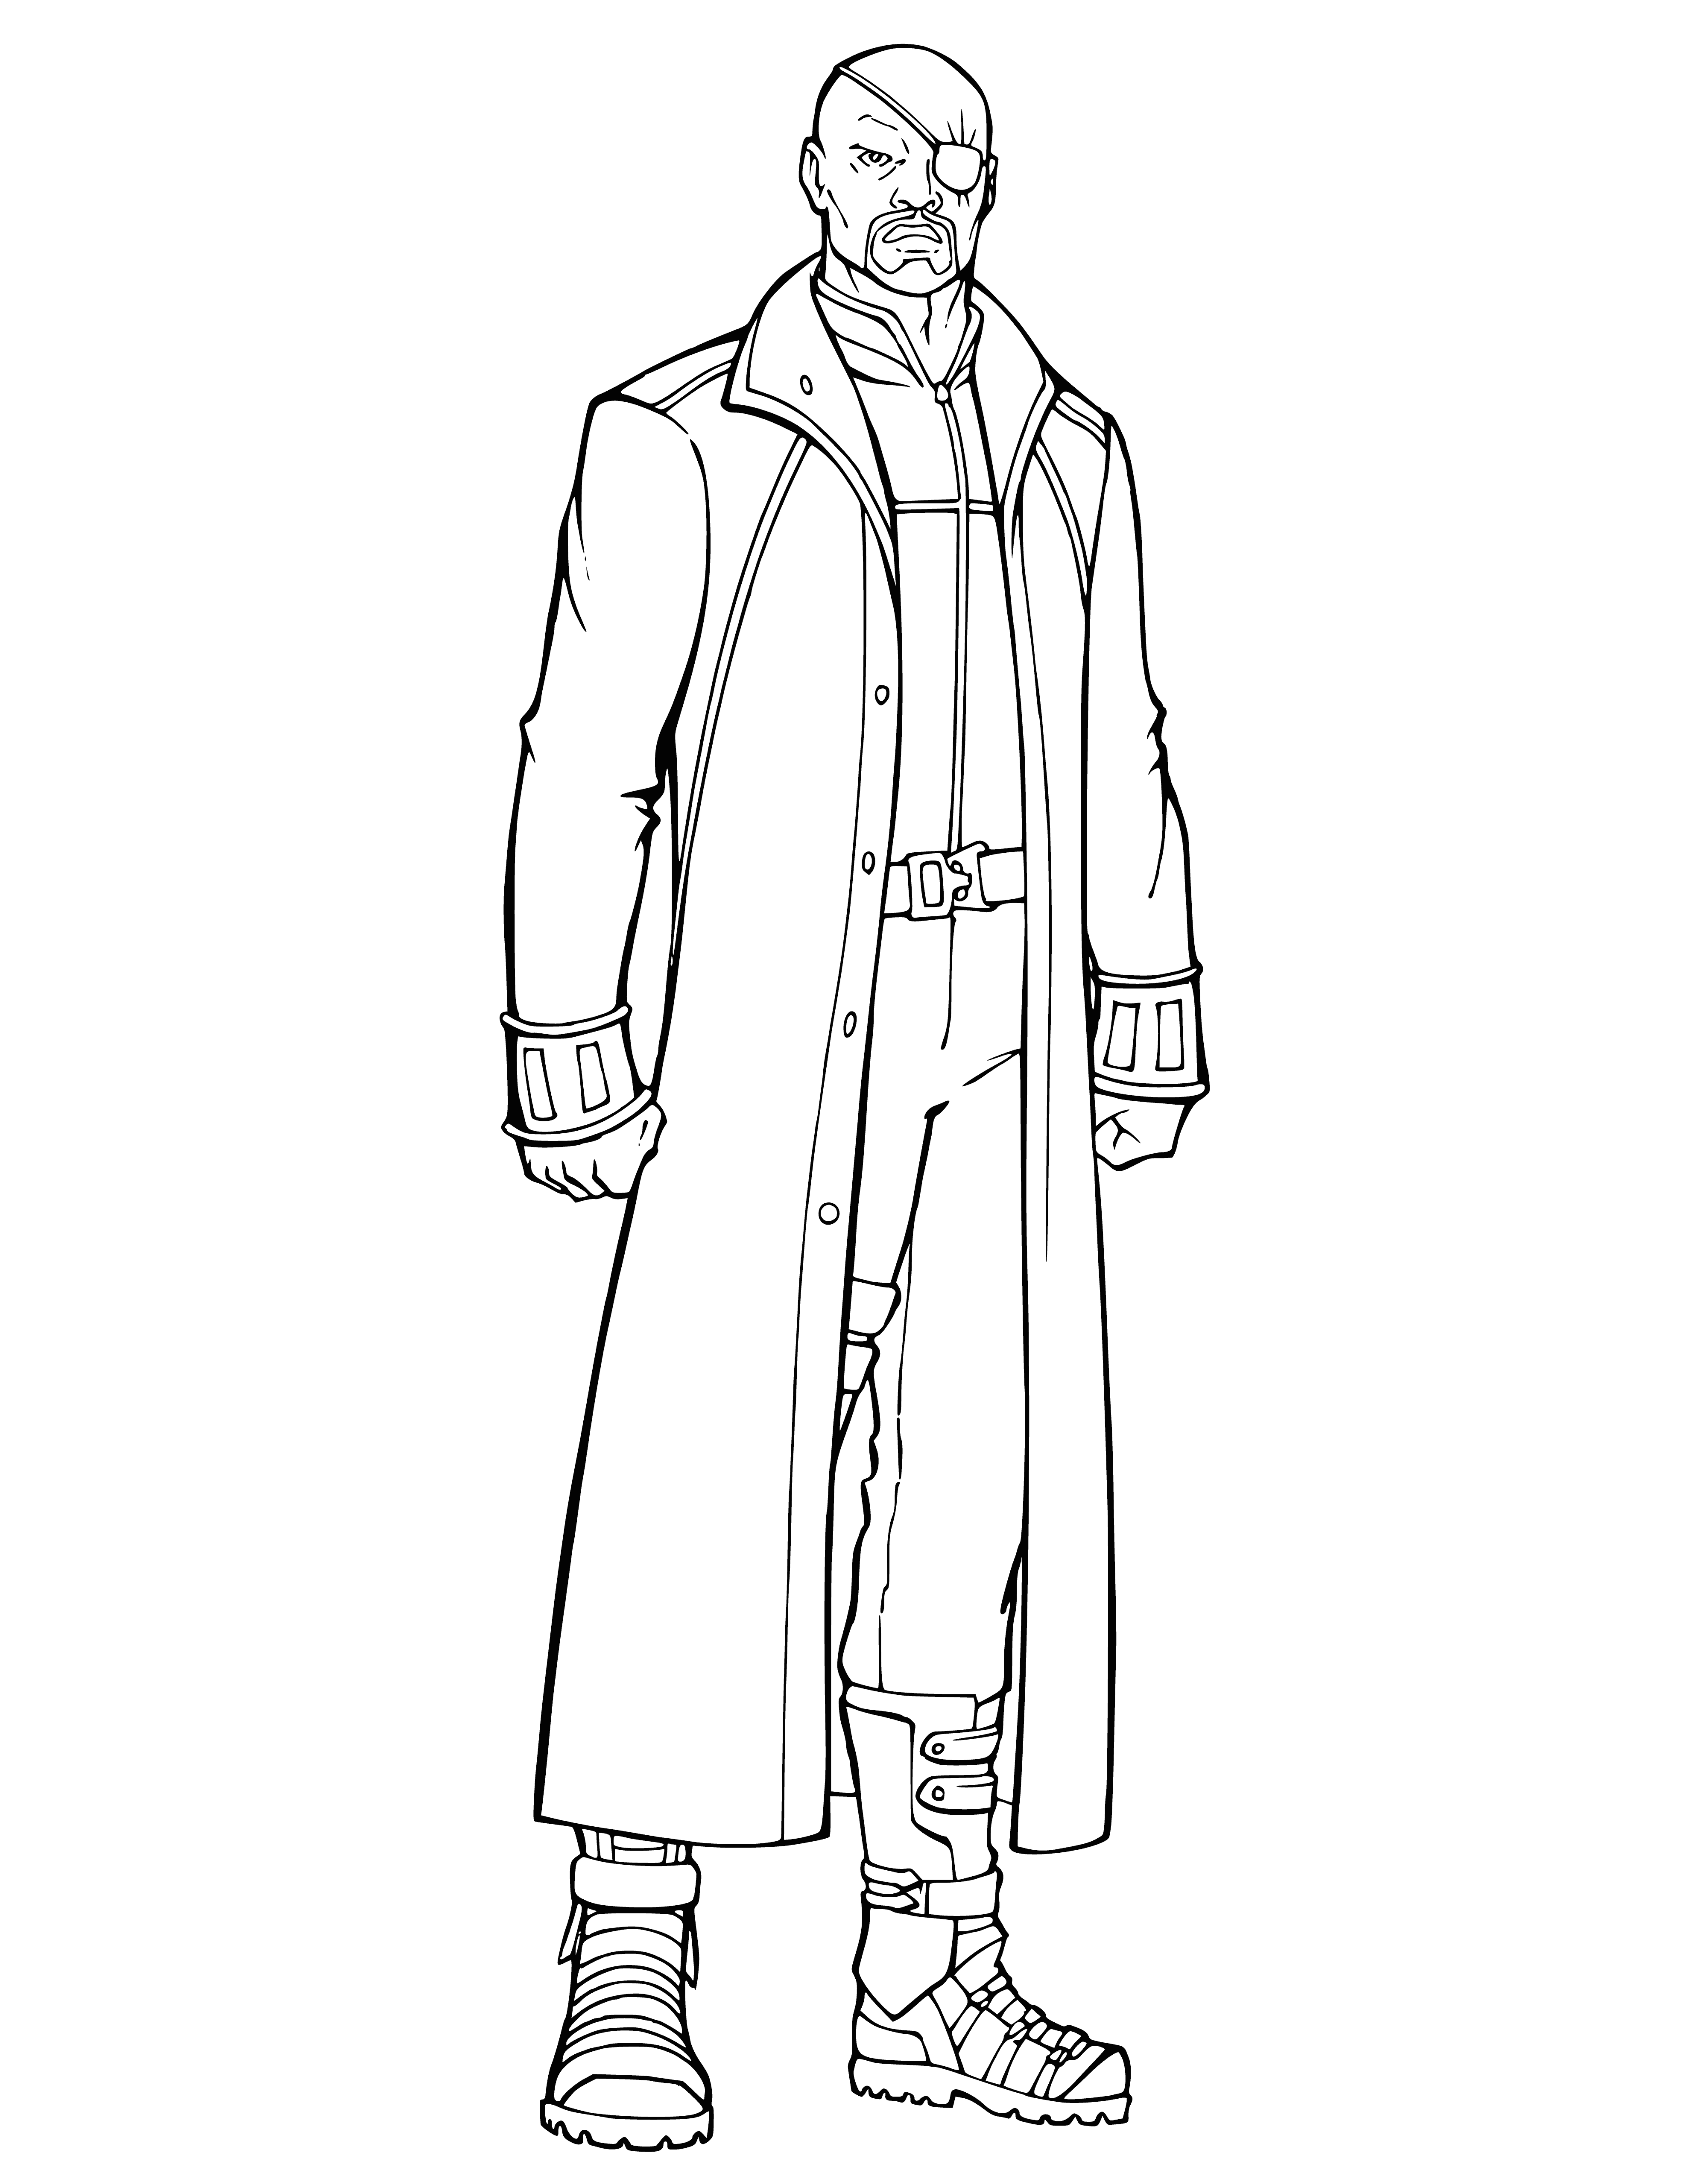 coloring page: Man with eye patch in black suit and white shirt, serious expression.